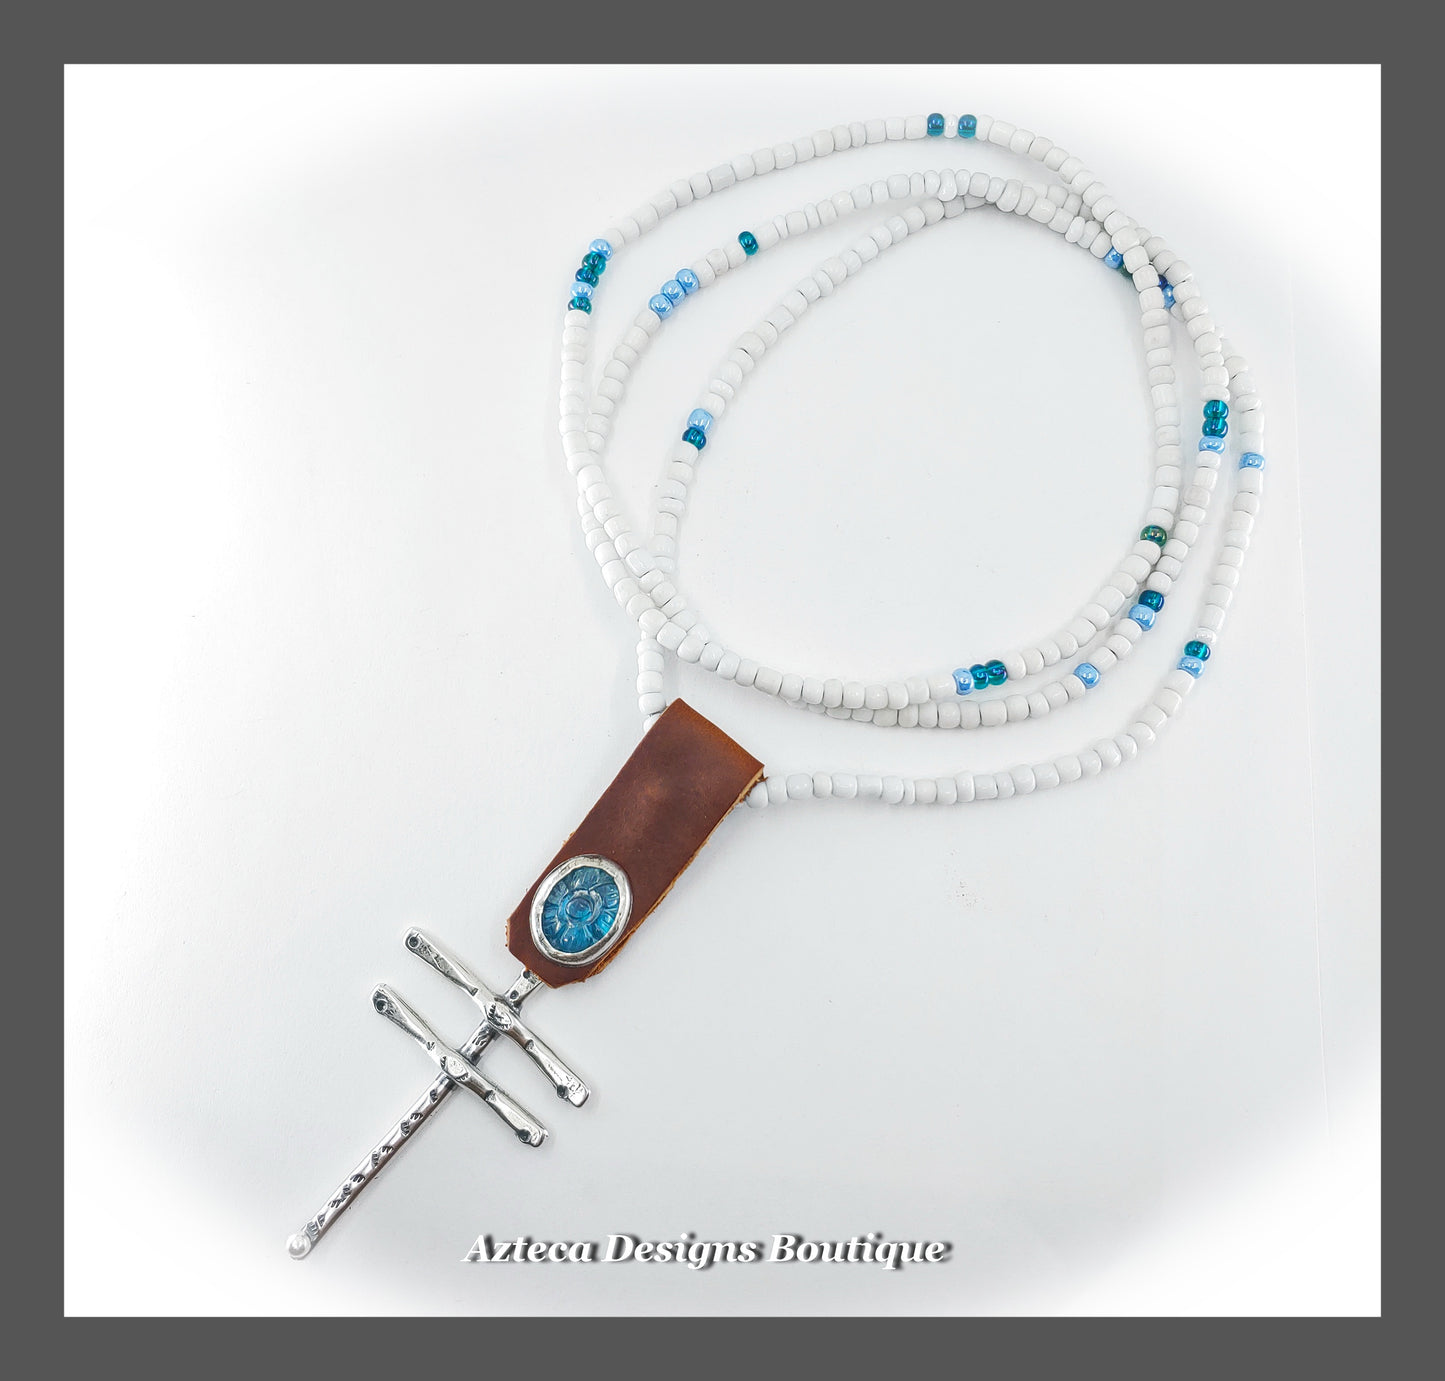 Tranquility + Teal Carved Flower Kyanite  + Dragonfly + Beaded Long Necklace